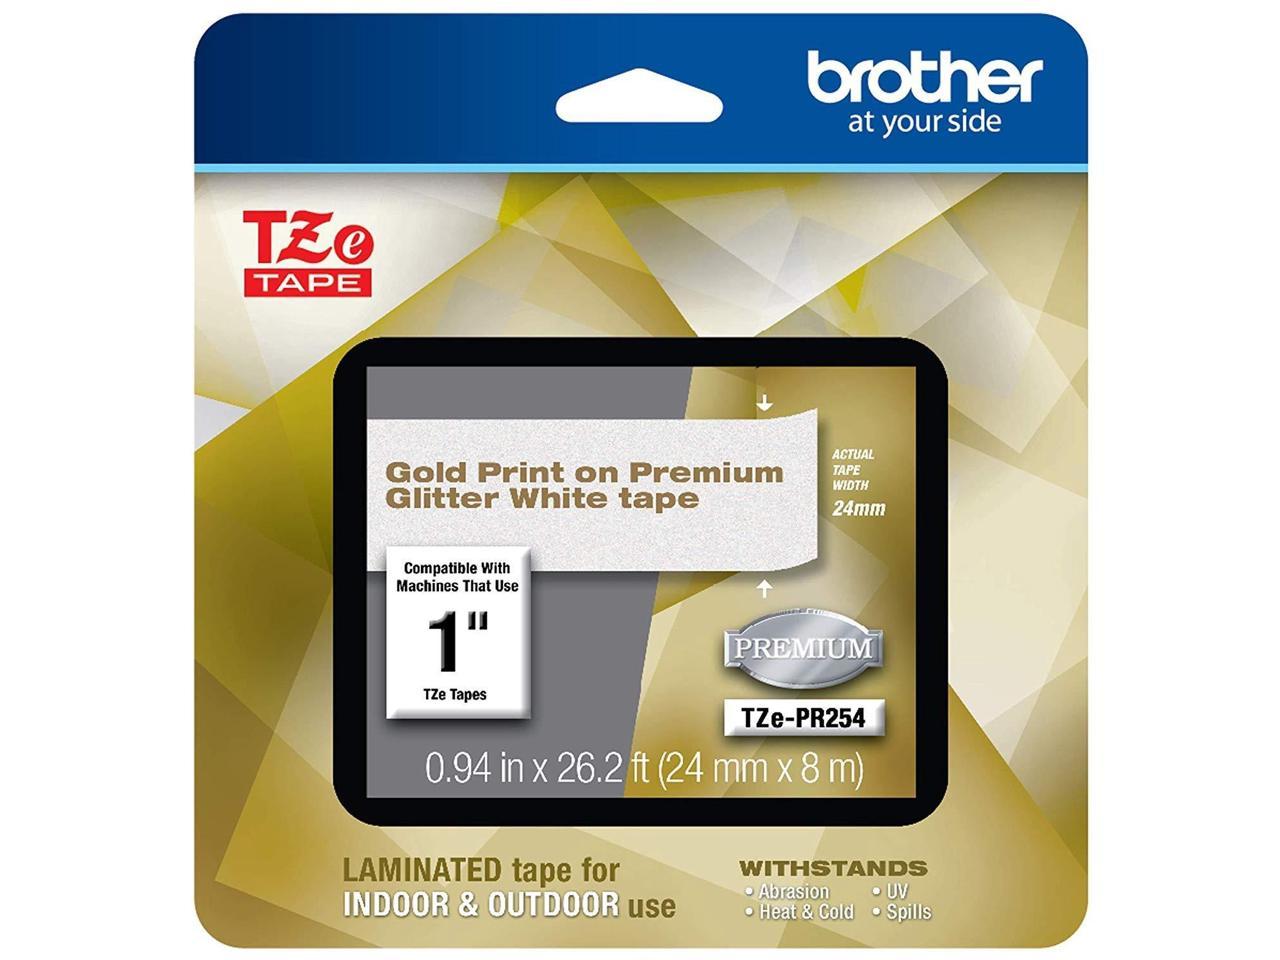 Brother TZePR254 Gold Print on Premium Glitter White Laminated Tape for P-touch Label Maker, 24 mm (0.94") Wide x 8 m (26.20 ft.) Long